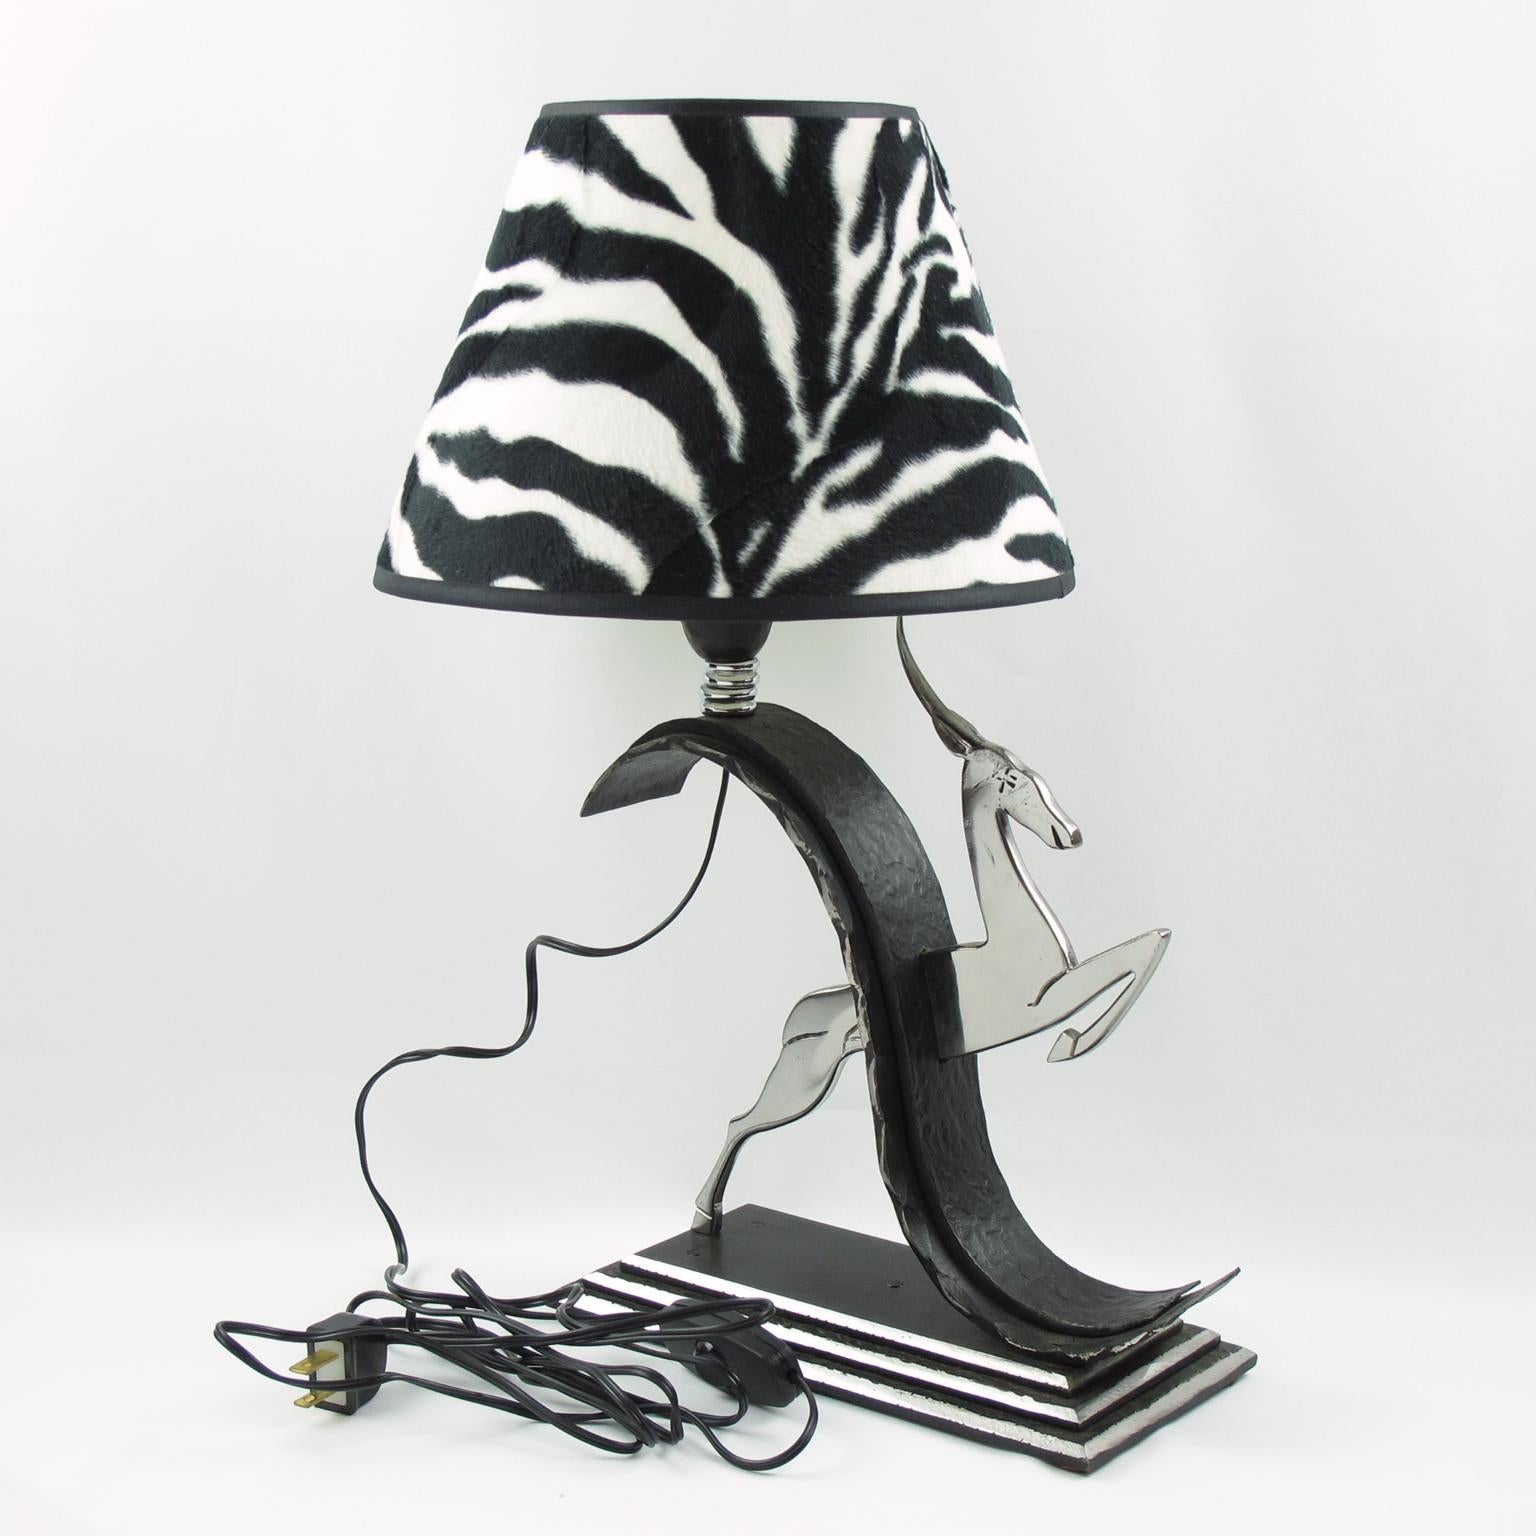 This exquisite Michel Zadounaisky Art Deco antelope wrought iron and chrome table lamp is a timeless piece of French design. The classic jumping antelope design is expertly hand-crafted with hammered wrought iron and chrome, mounted on a rectangular